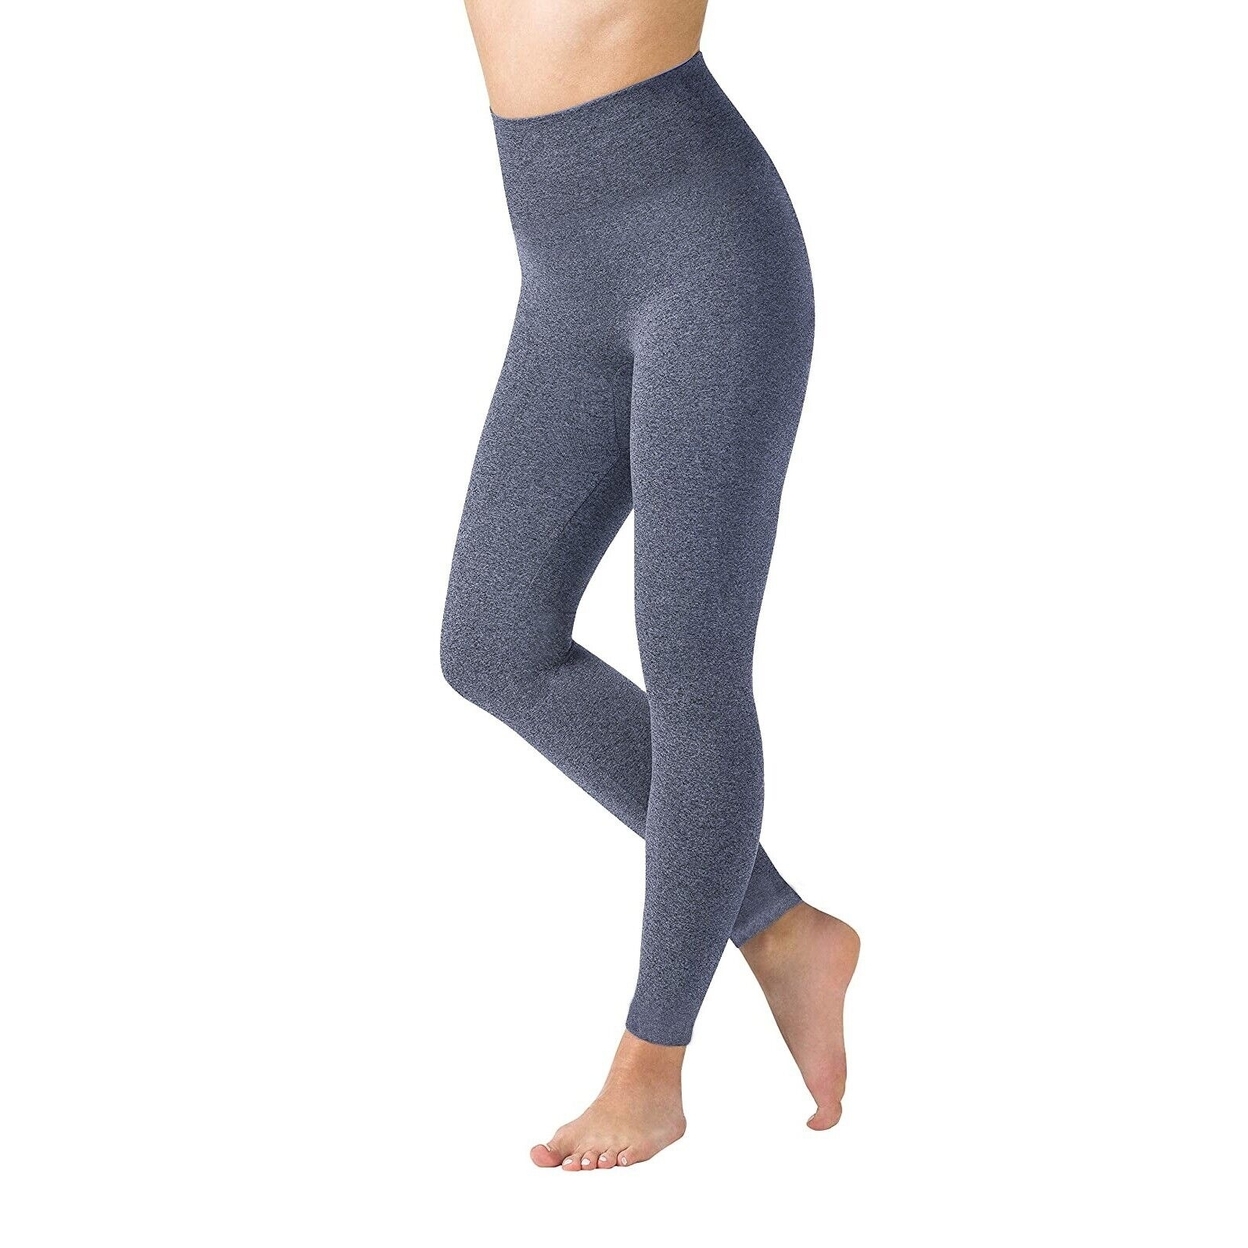 Multi-Packs Women High Waisted Fleece Lined Marled Leggings Ultra Soft Warm Pant - Charcoal/navy, 2, 1x